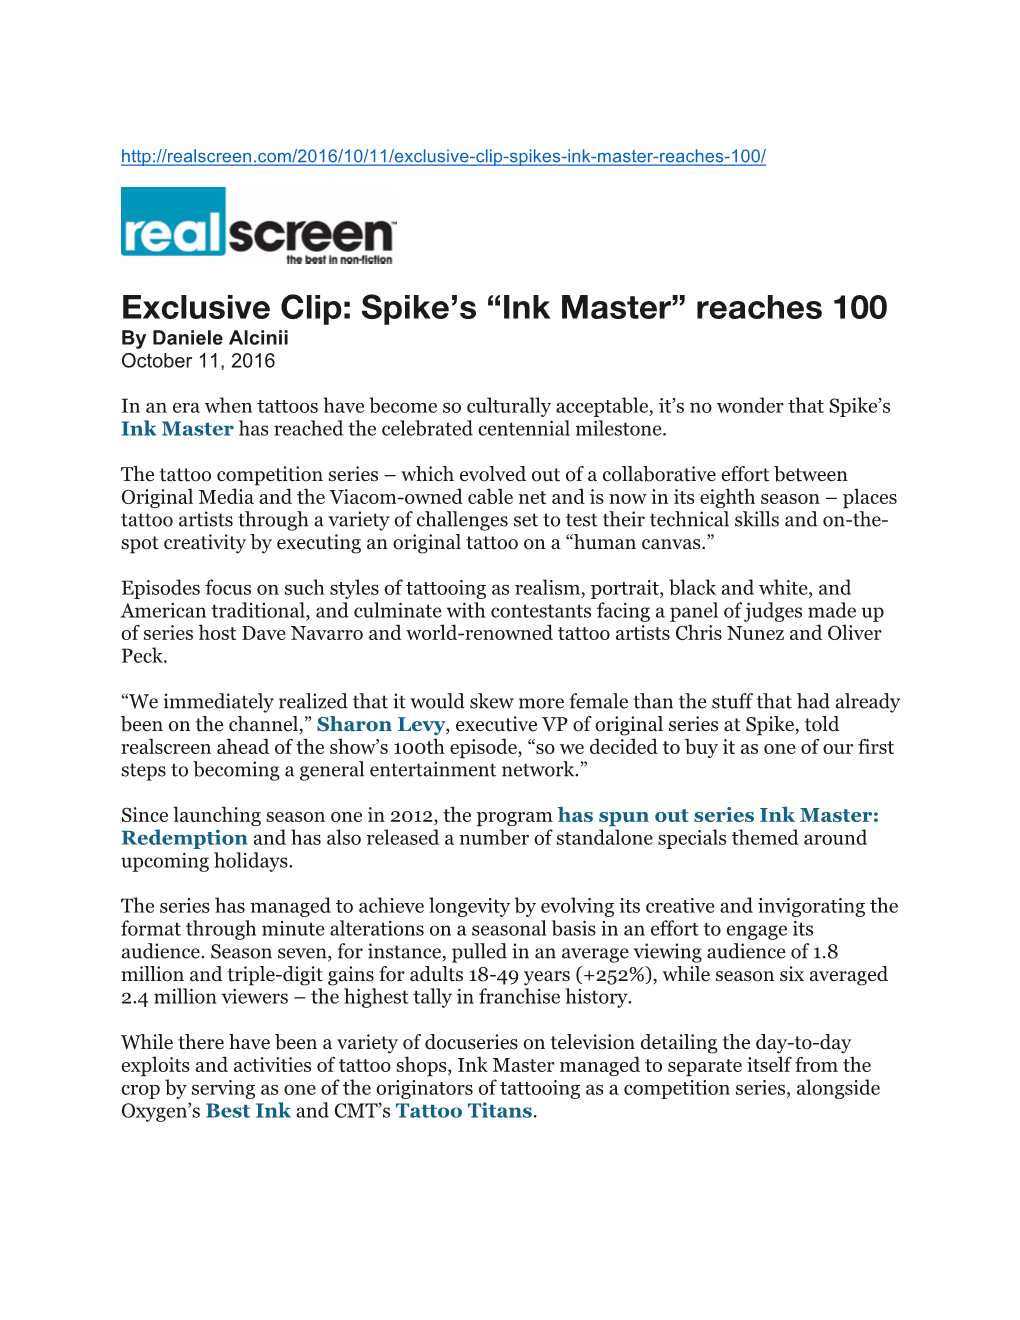 Exclusive Clip: Spike’S “Ink Master” Reaches 100 by Daniele Alcinii October 11, 2016